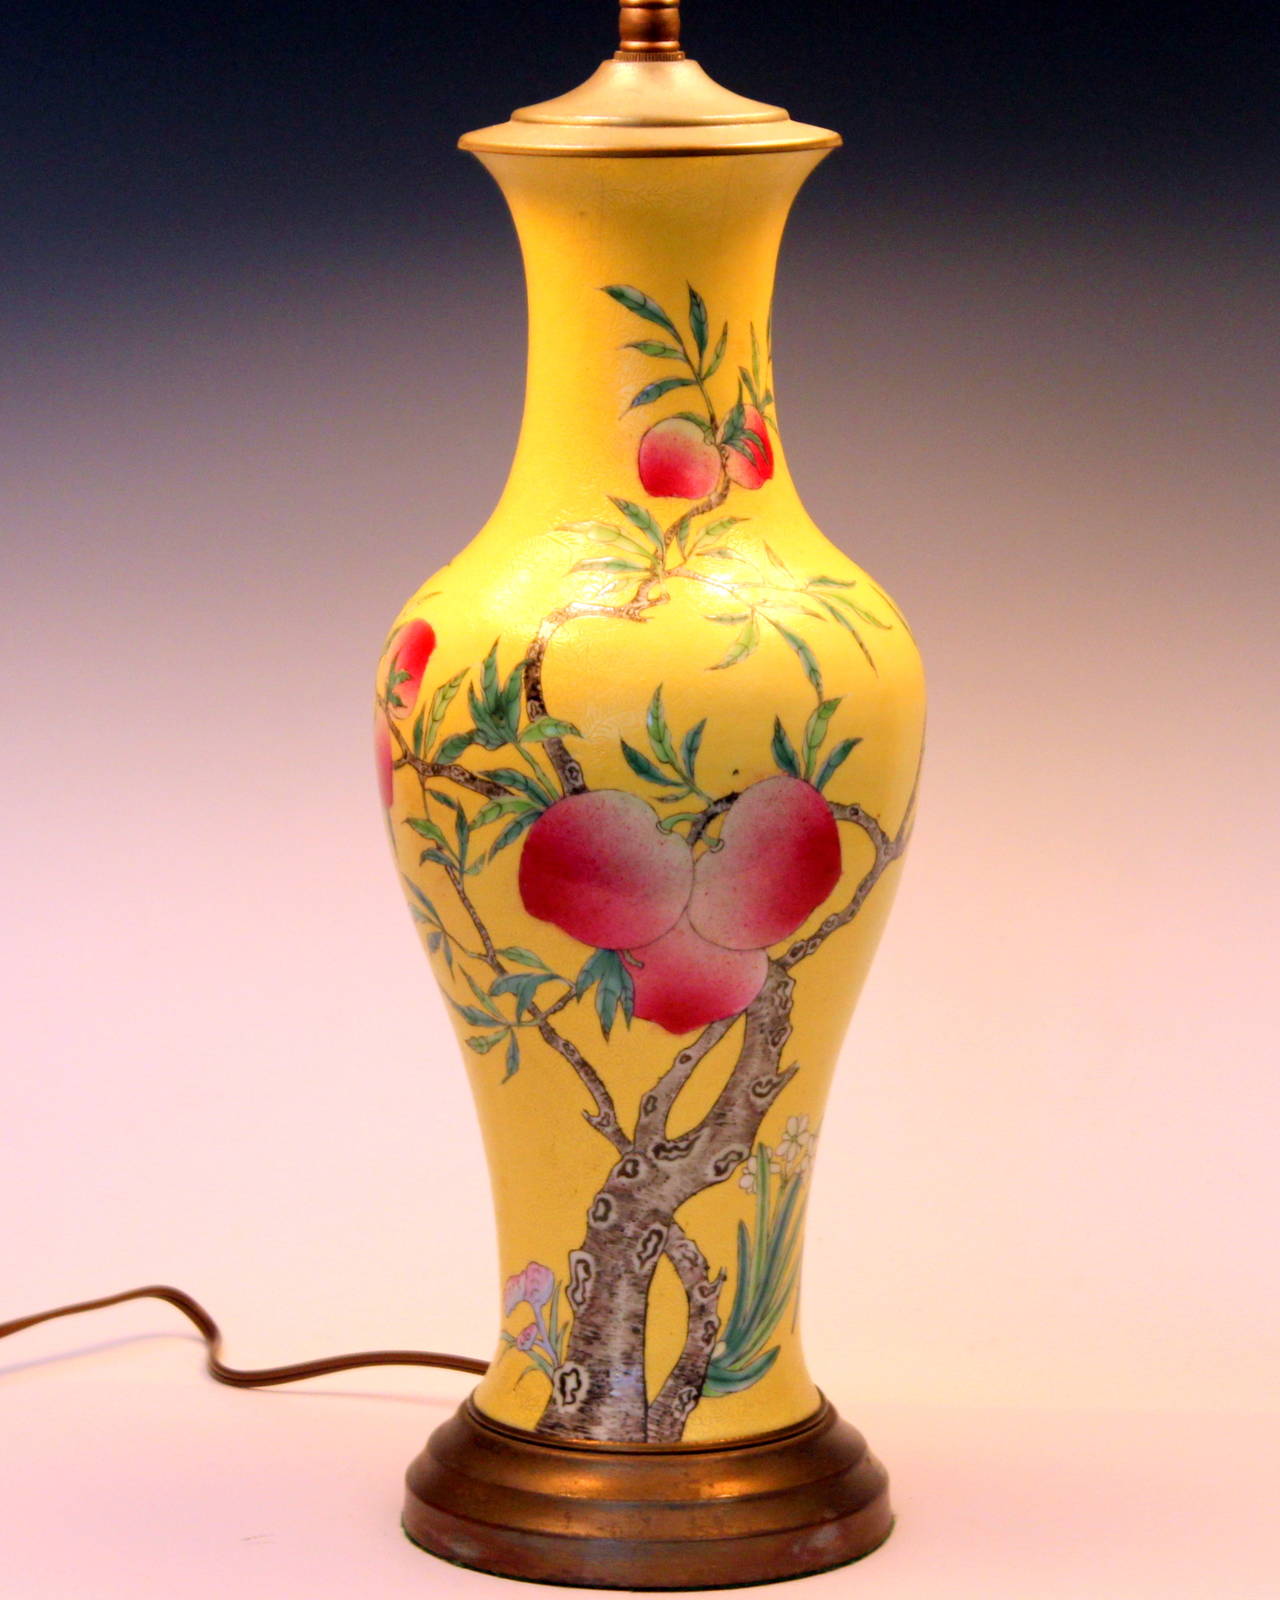 Good antique Chinese porcelain peach vase lamp depicting nine peaches ripening on the tree and a single bat on an incised yellow ground. Qianlong six character mark in over glaze red. 19th century. Vase is 13 1/2